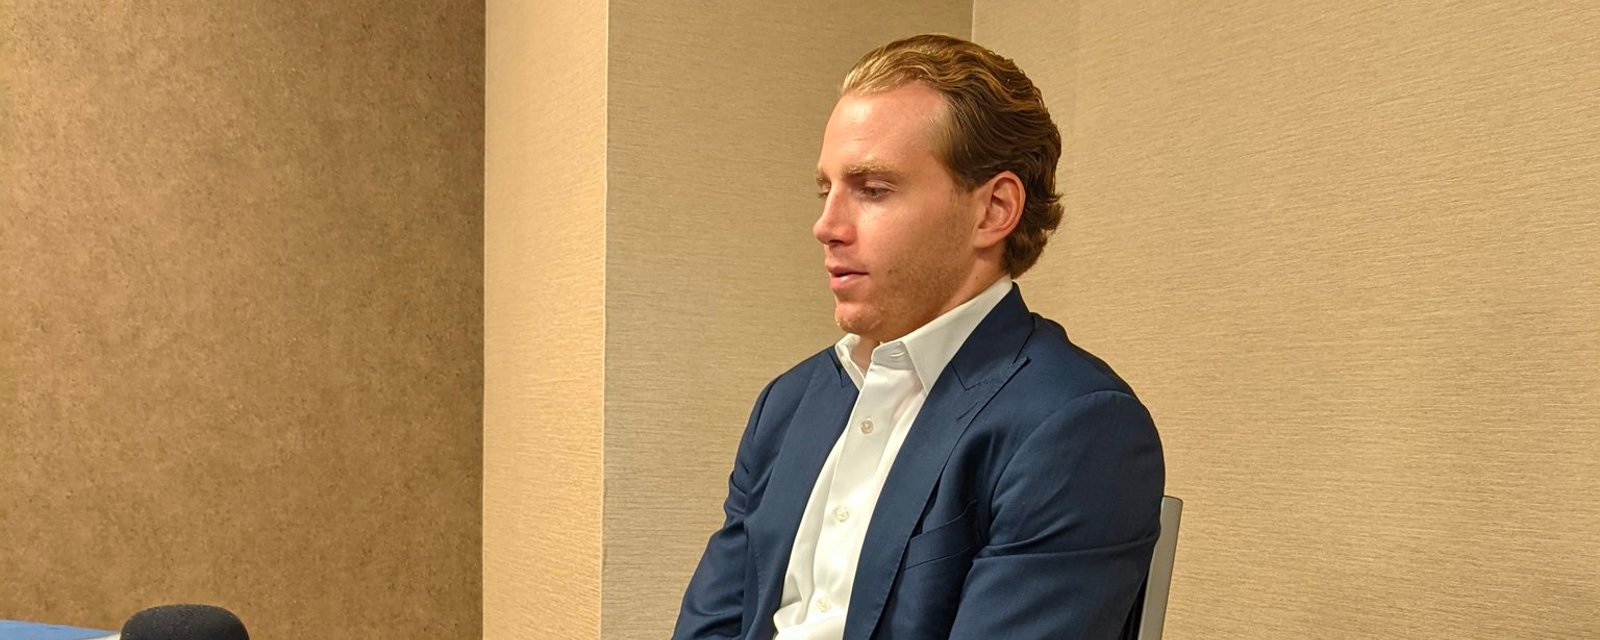 Report: Patrick Kane has participated in sex abuse investigation 